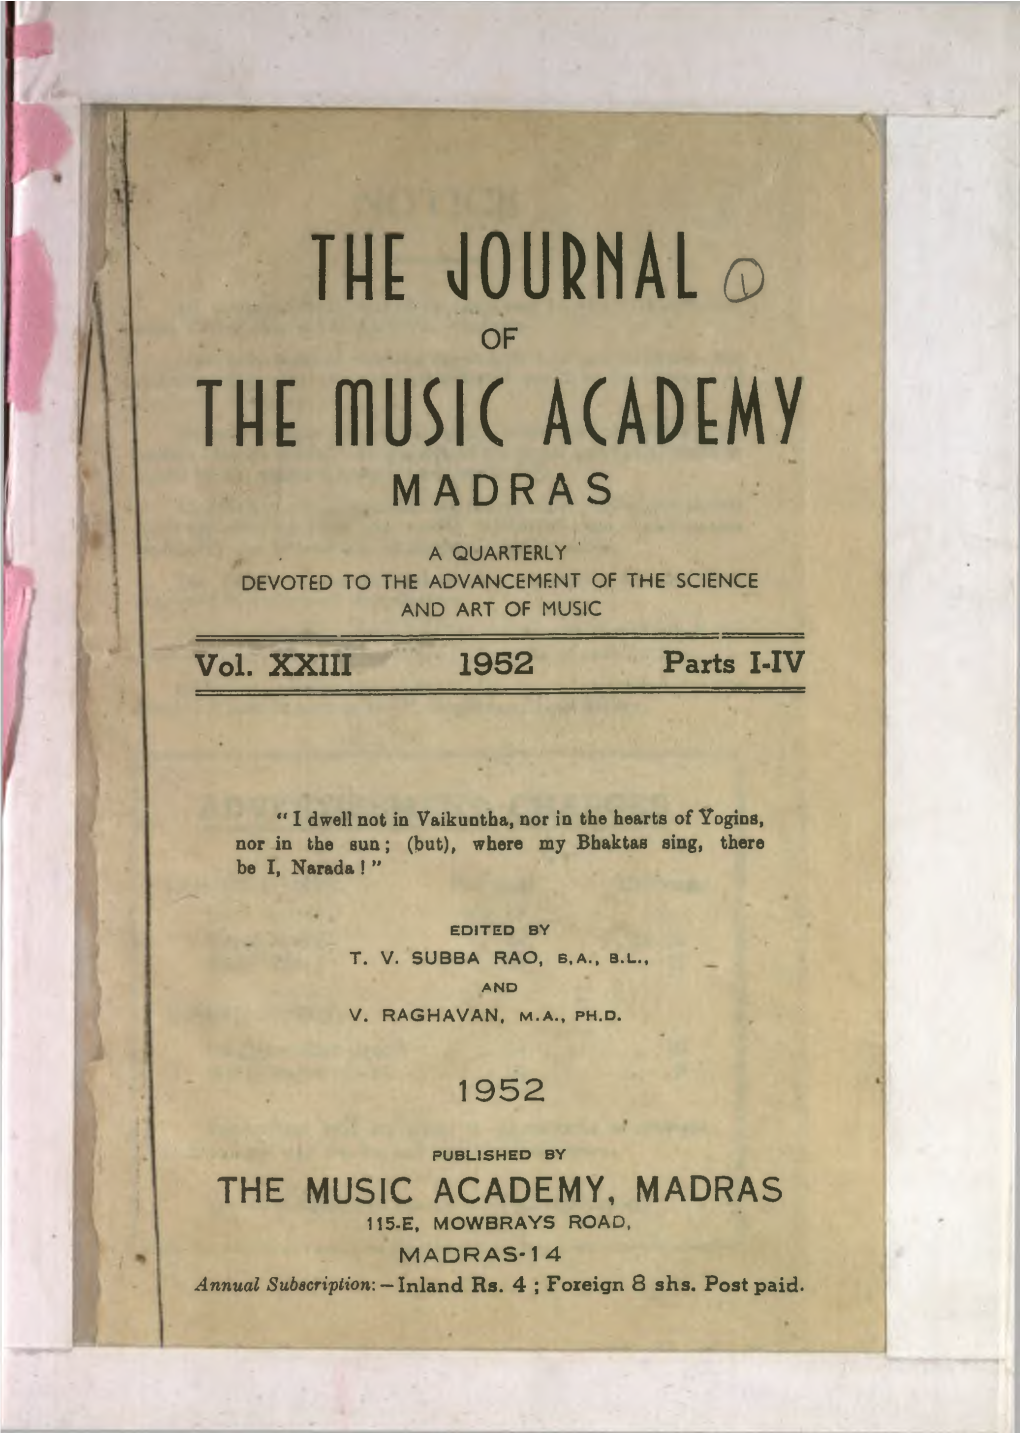 THE MUSIC ACADEMY, MADRAS 115-E, MOWBRAYS ROAD, MADRAS-1 4 Annual Subscription: — Inland Rs